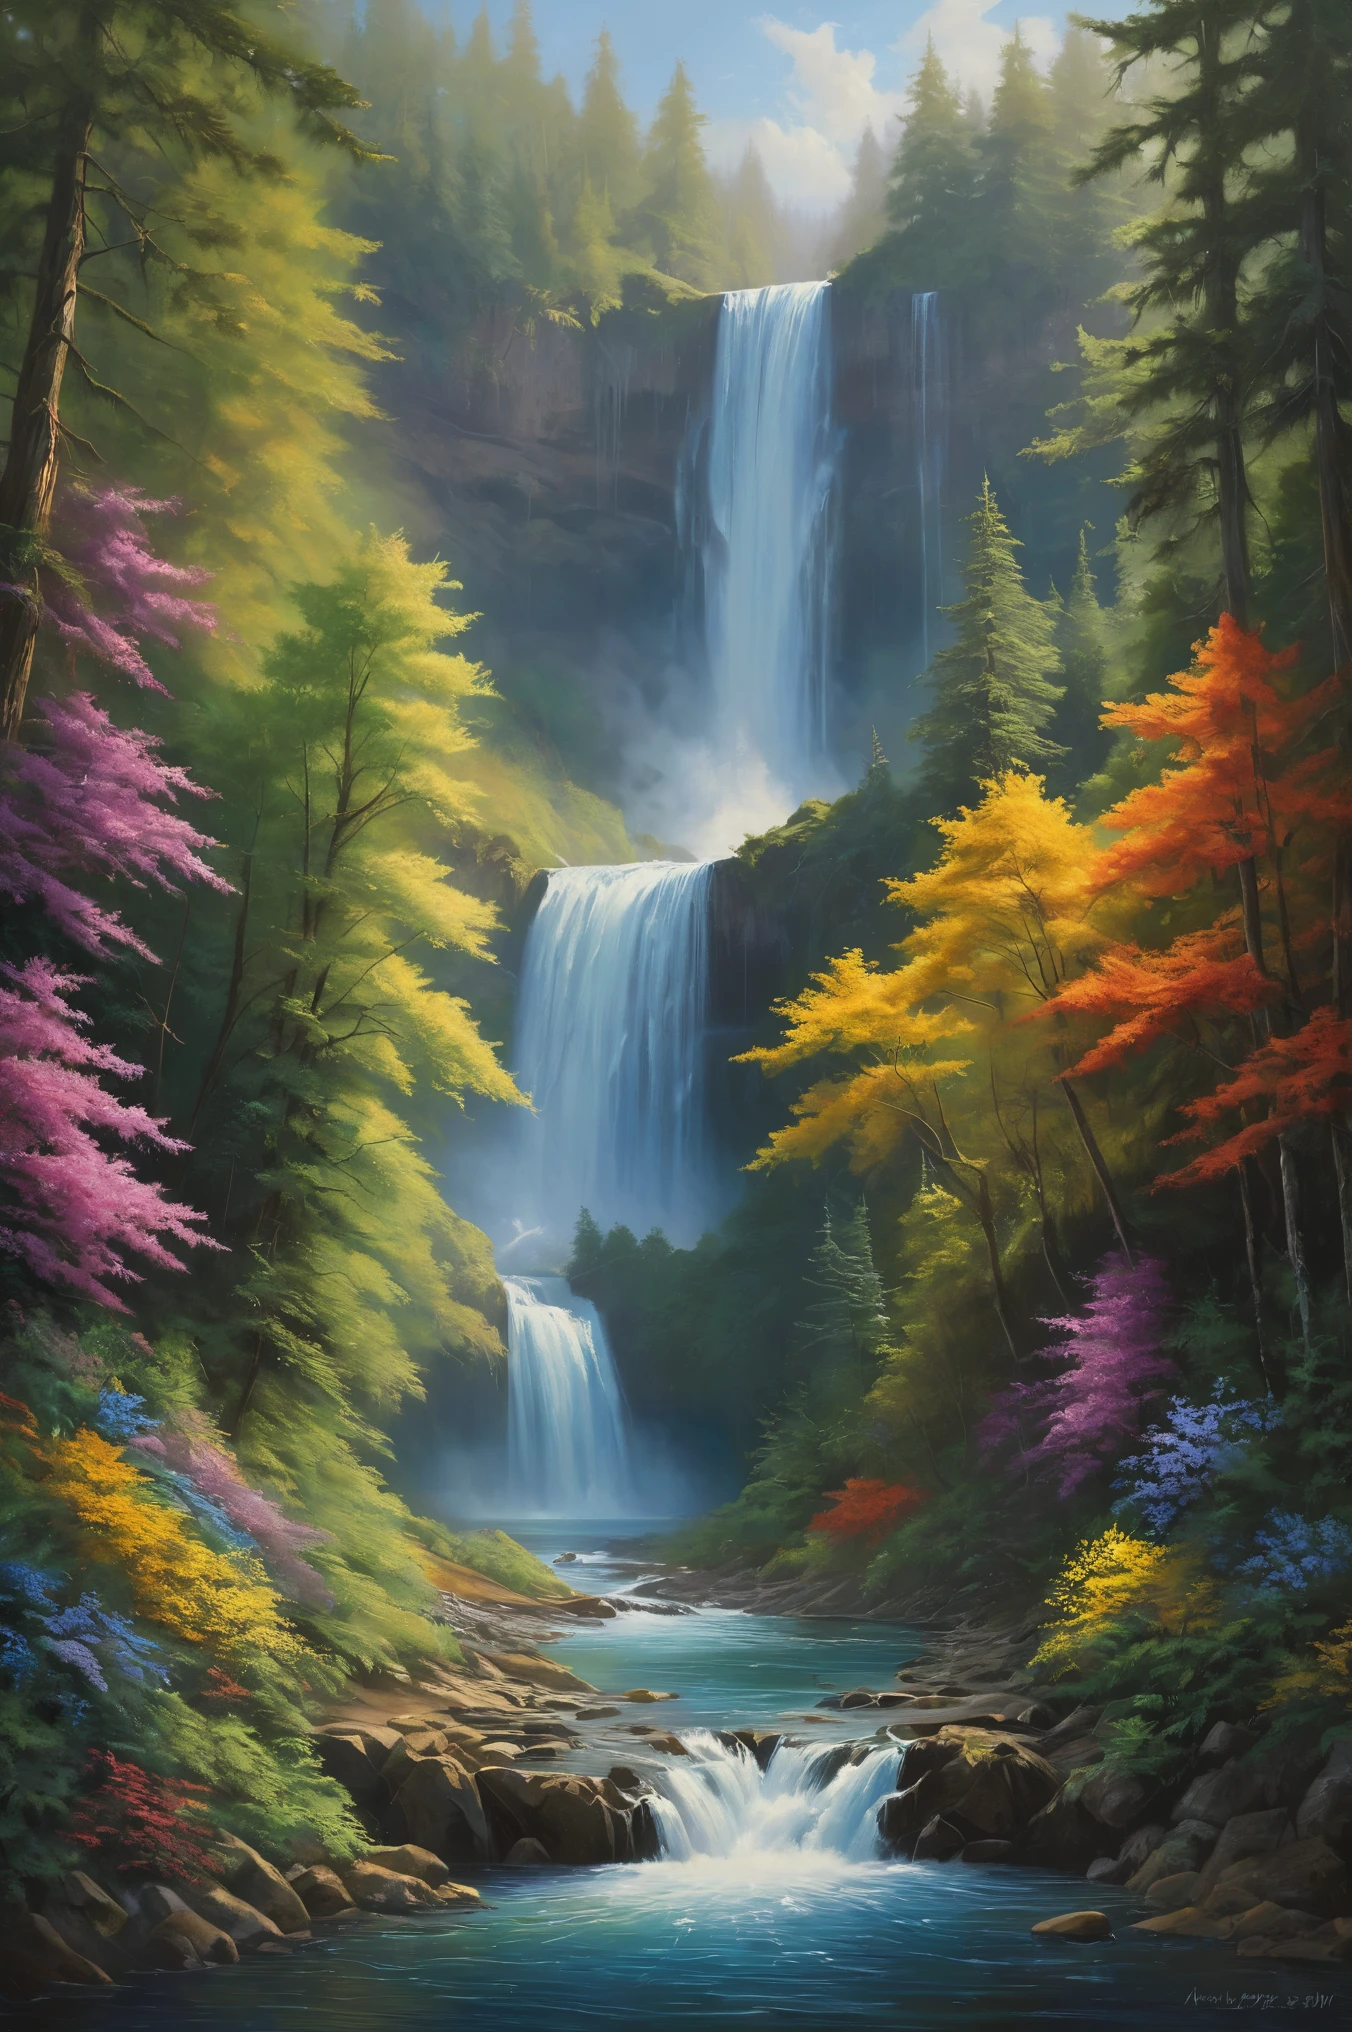 painting of a cascade in a forest with a river running through it, an endless cascade, multiple cascades, cascades, with trees and cascades, floating cascades, (cascade), with cascades, par Michael James Smith, en cascade cascades, flowers and cascades, en cascade iridescent cascades, cascade, several cascades, high cascades, en cascade, forest and cascade